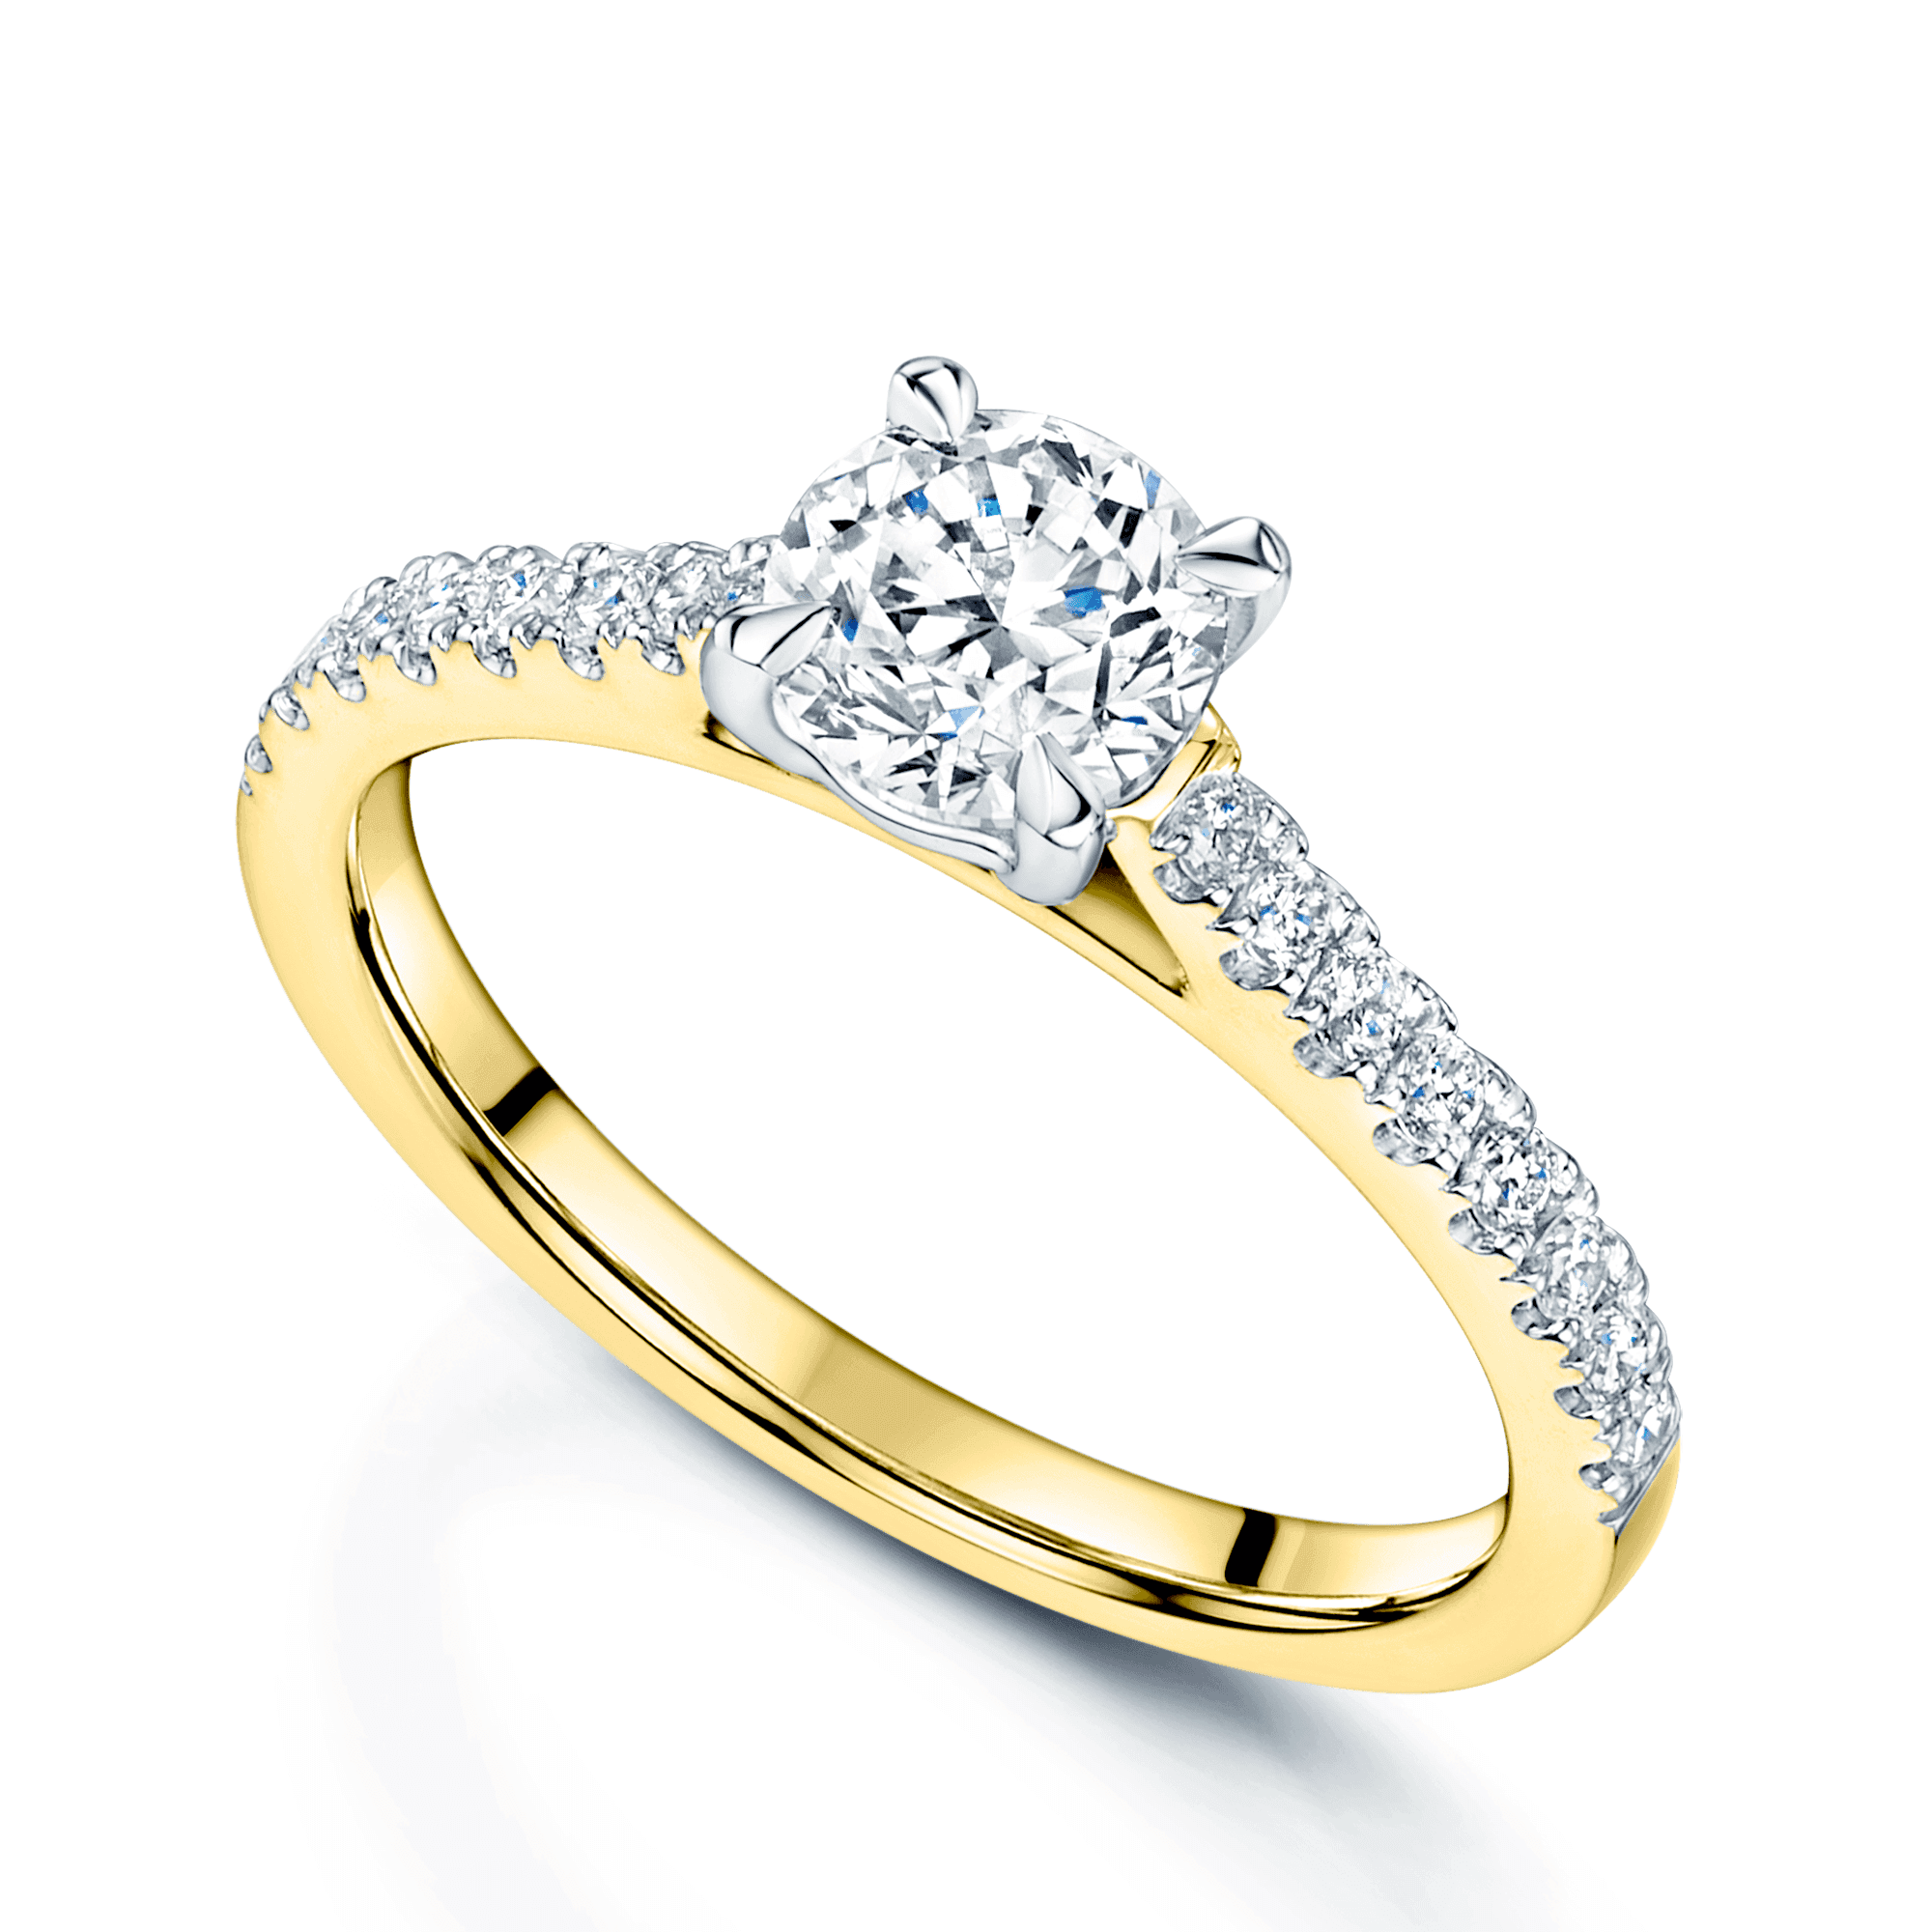 Simply Solitaire Collection 18ct Yellow Gold Diamond Solitaire Engagement Ring With Diamond Shoulders GIA Certified 0.70 Carat